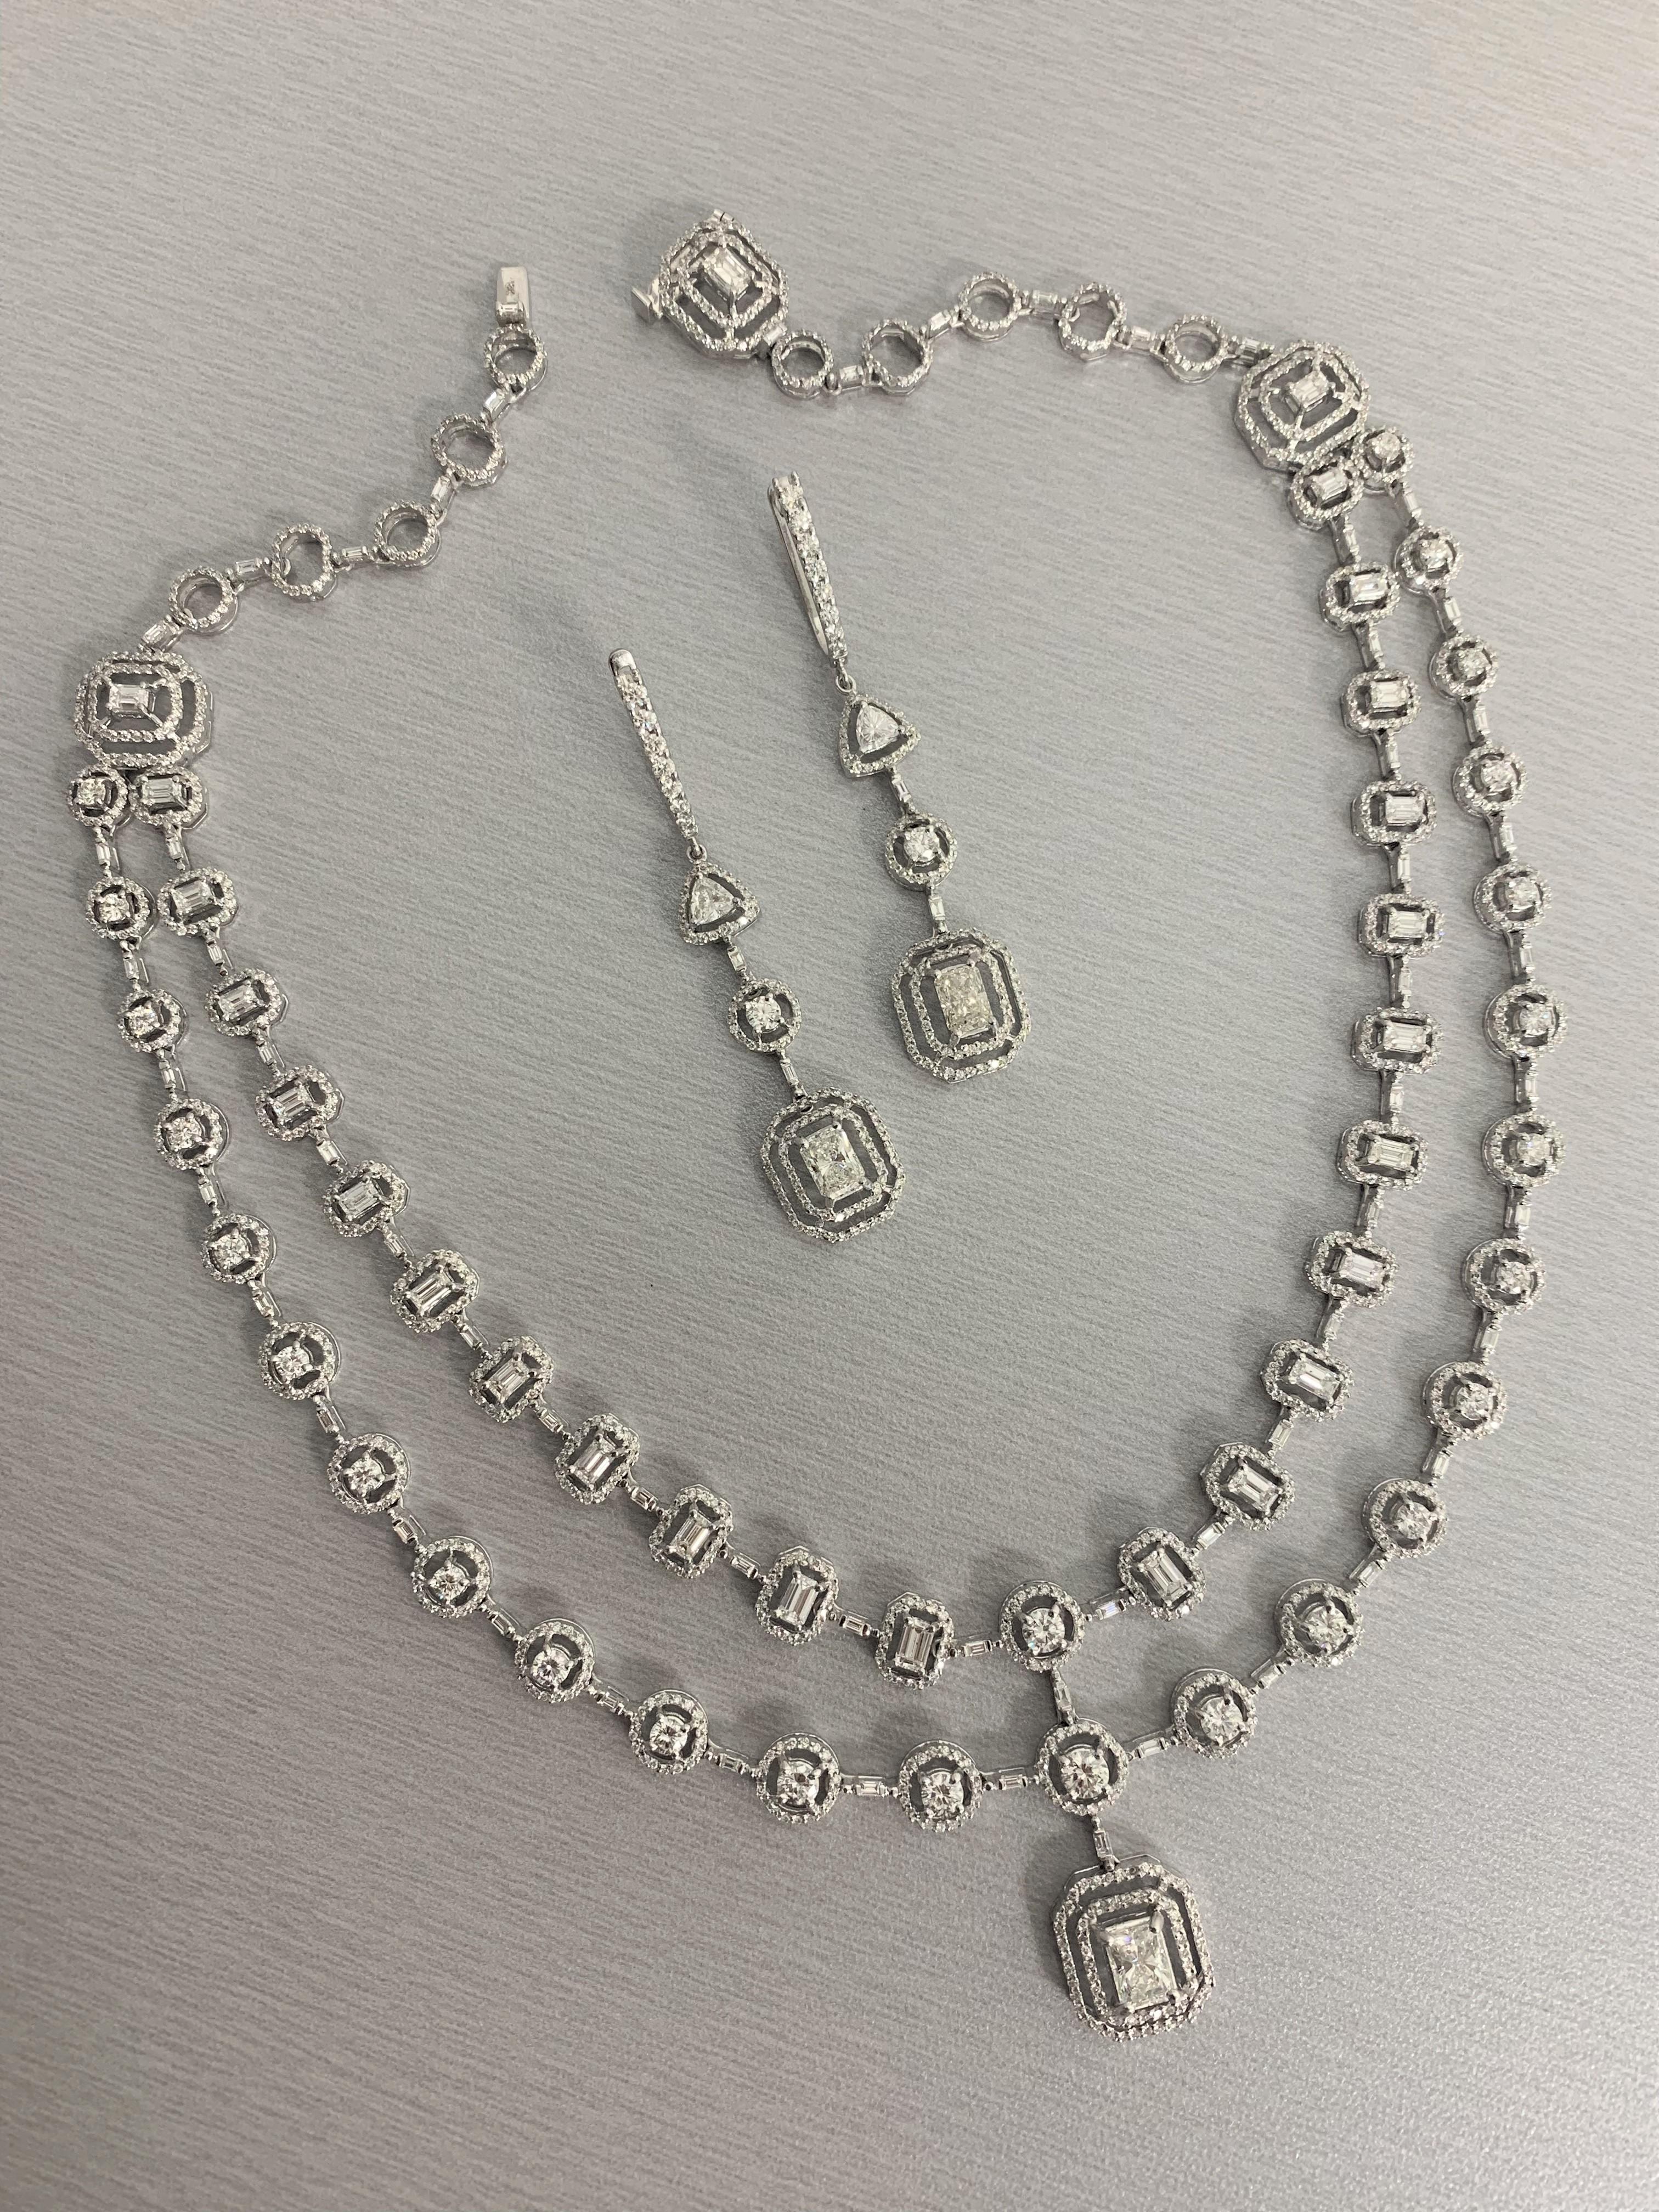 white gold diamond necklace and earrings